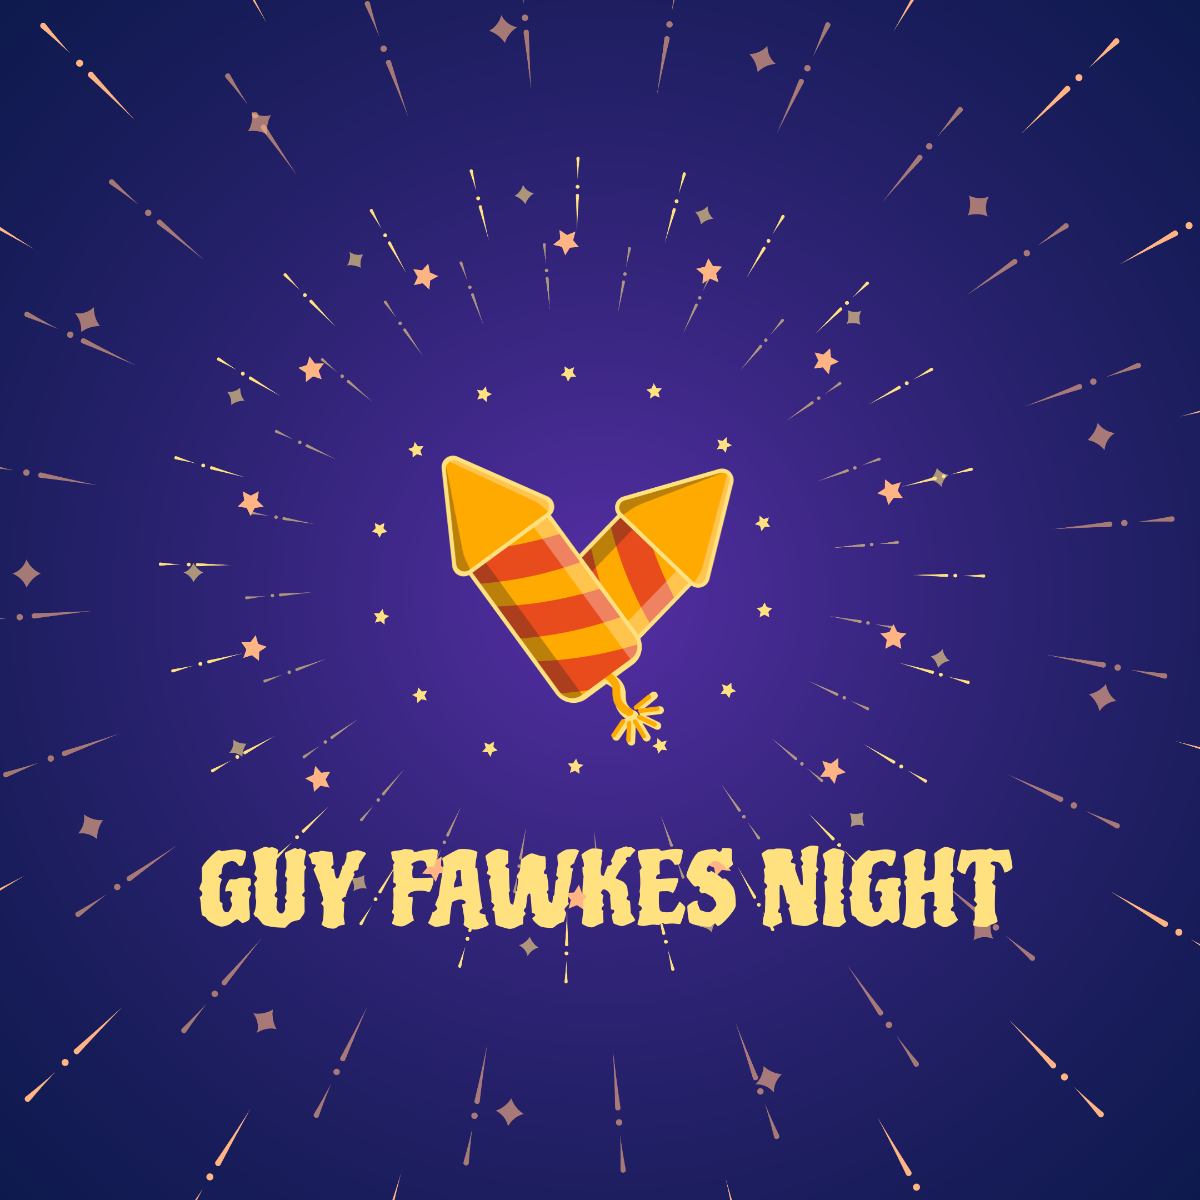 Free Guy Fawkes Night Instagram Post Template